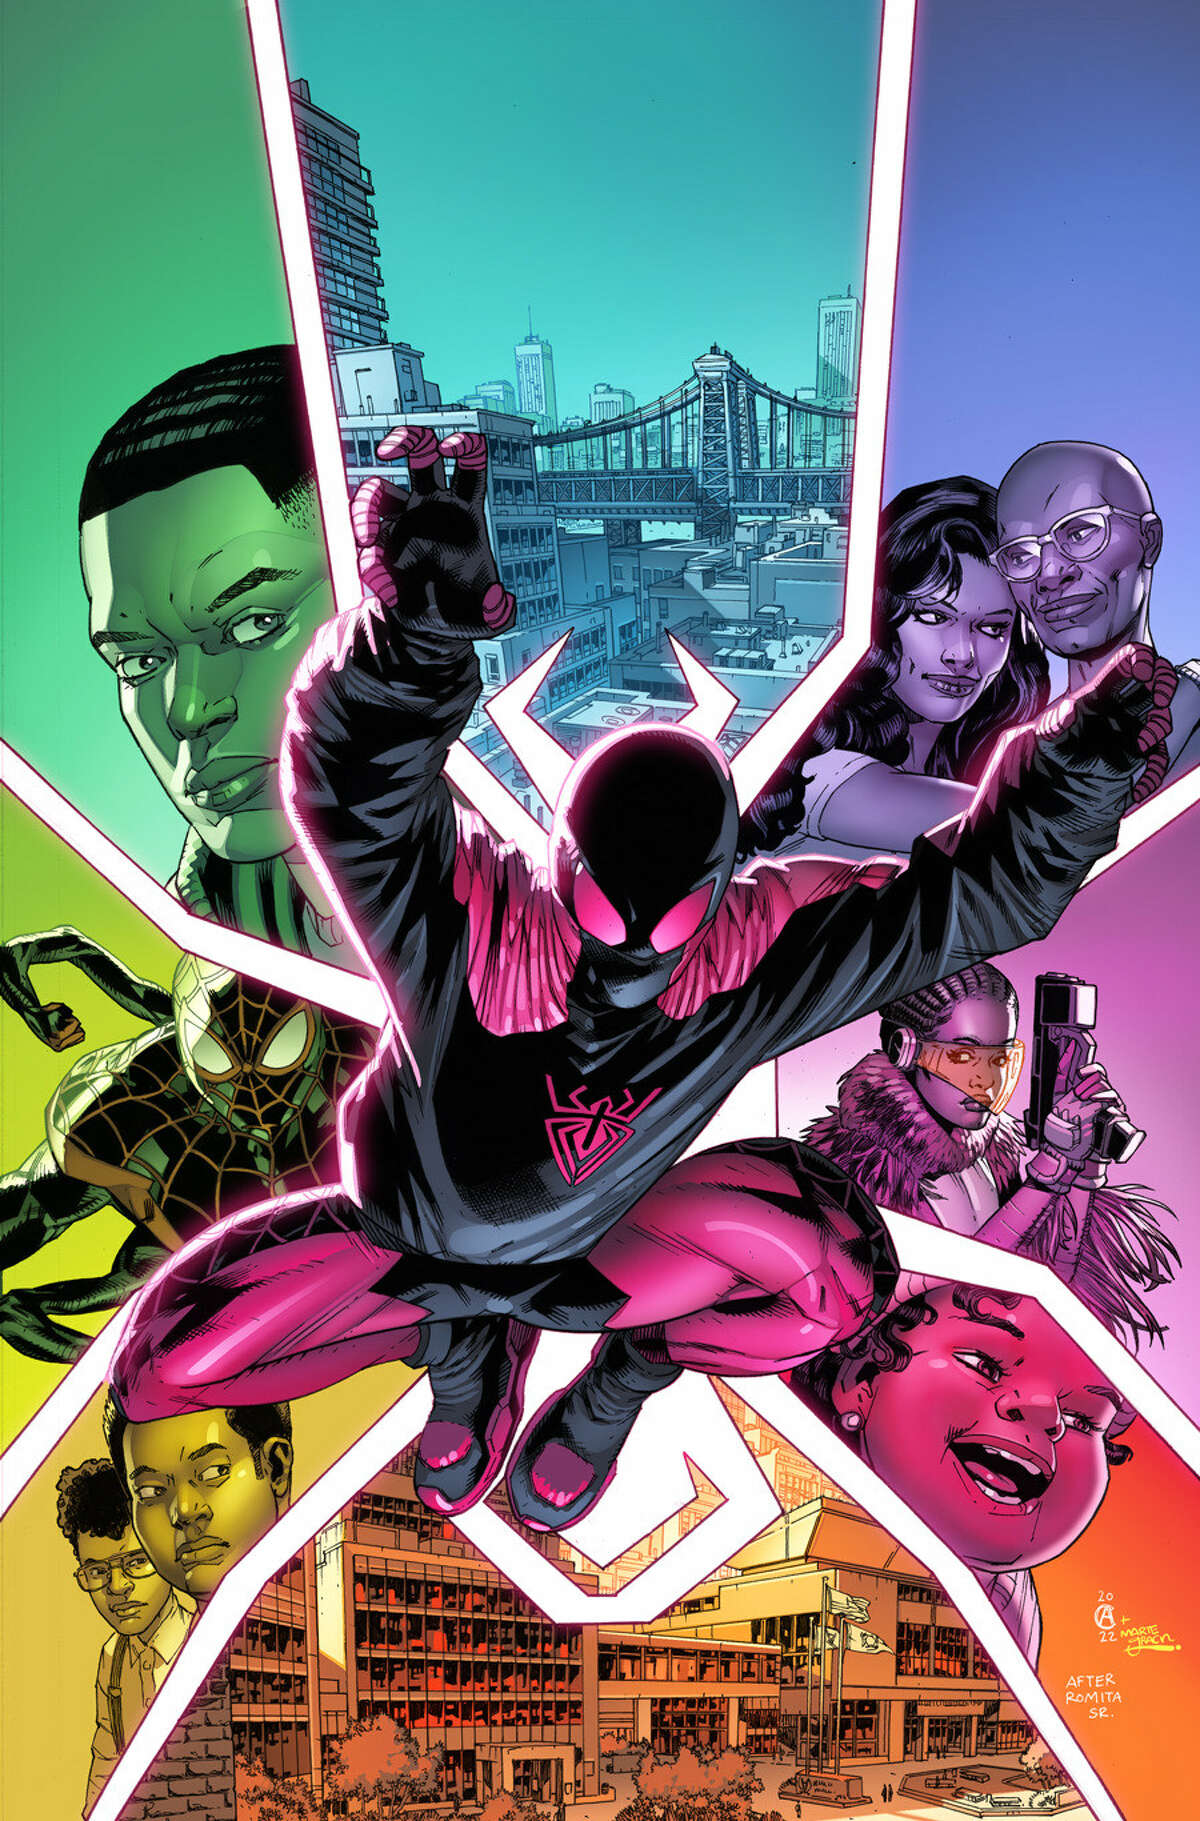 Variant cover for "Miles Morales: Spider-Man" No. 42 by San Antonio artist Chris Allen. Allen recently was announced as an exclusive artist at Marvel Comics.